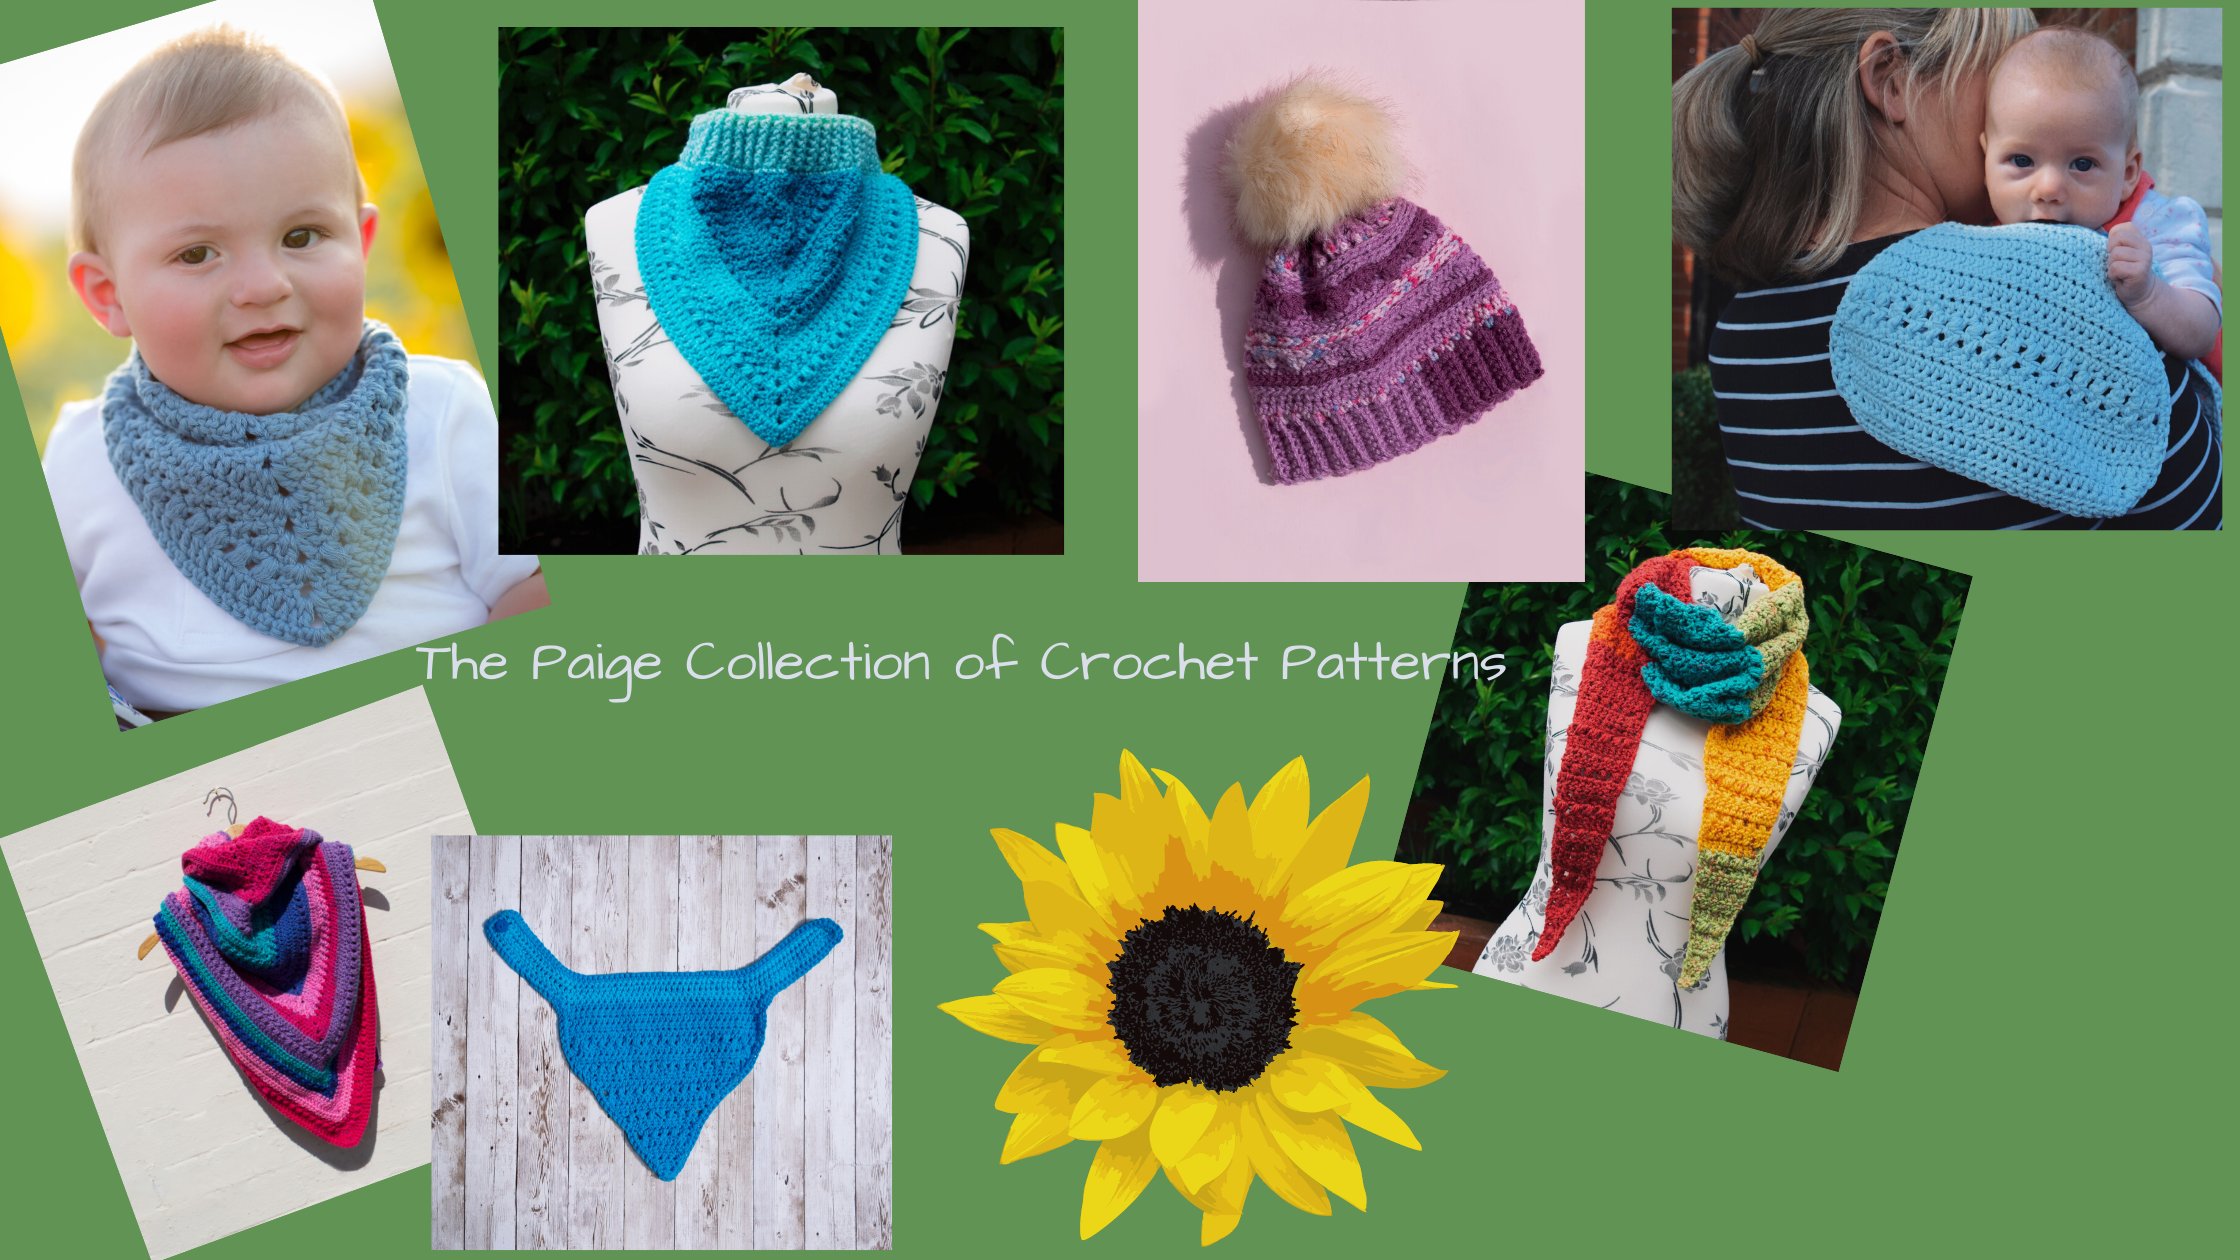 The Paige Crochet Collection of Patterns